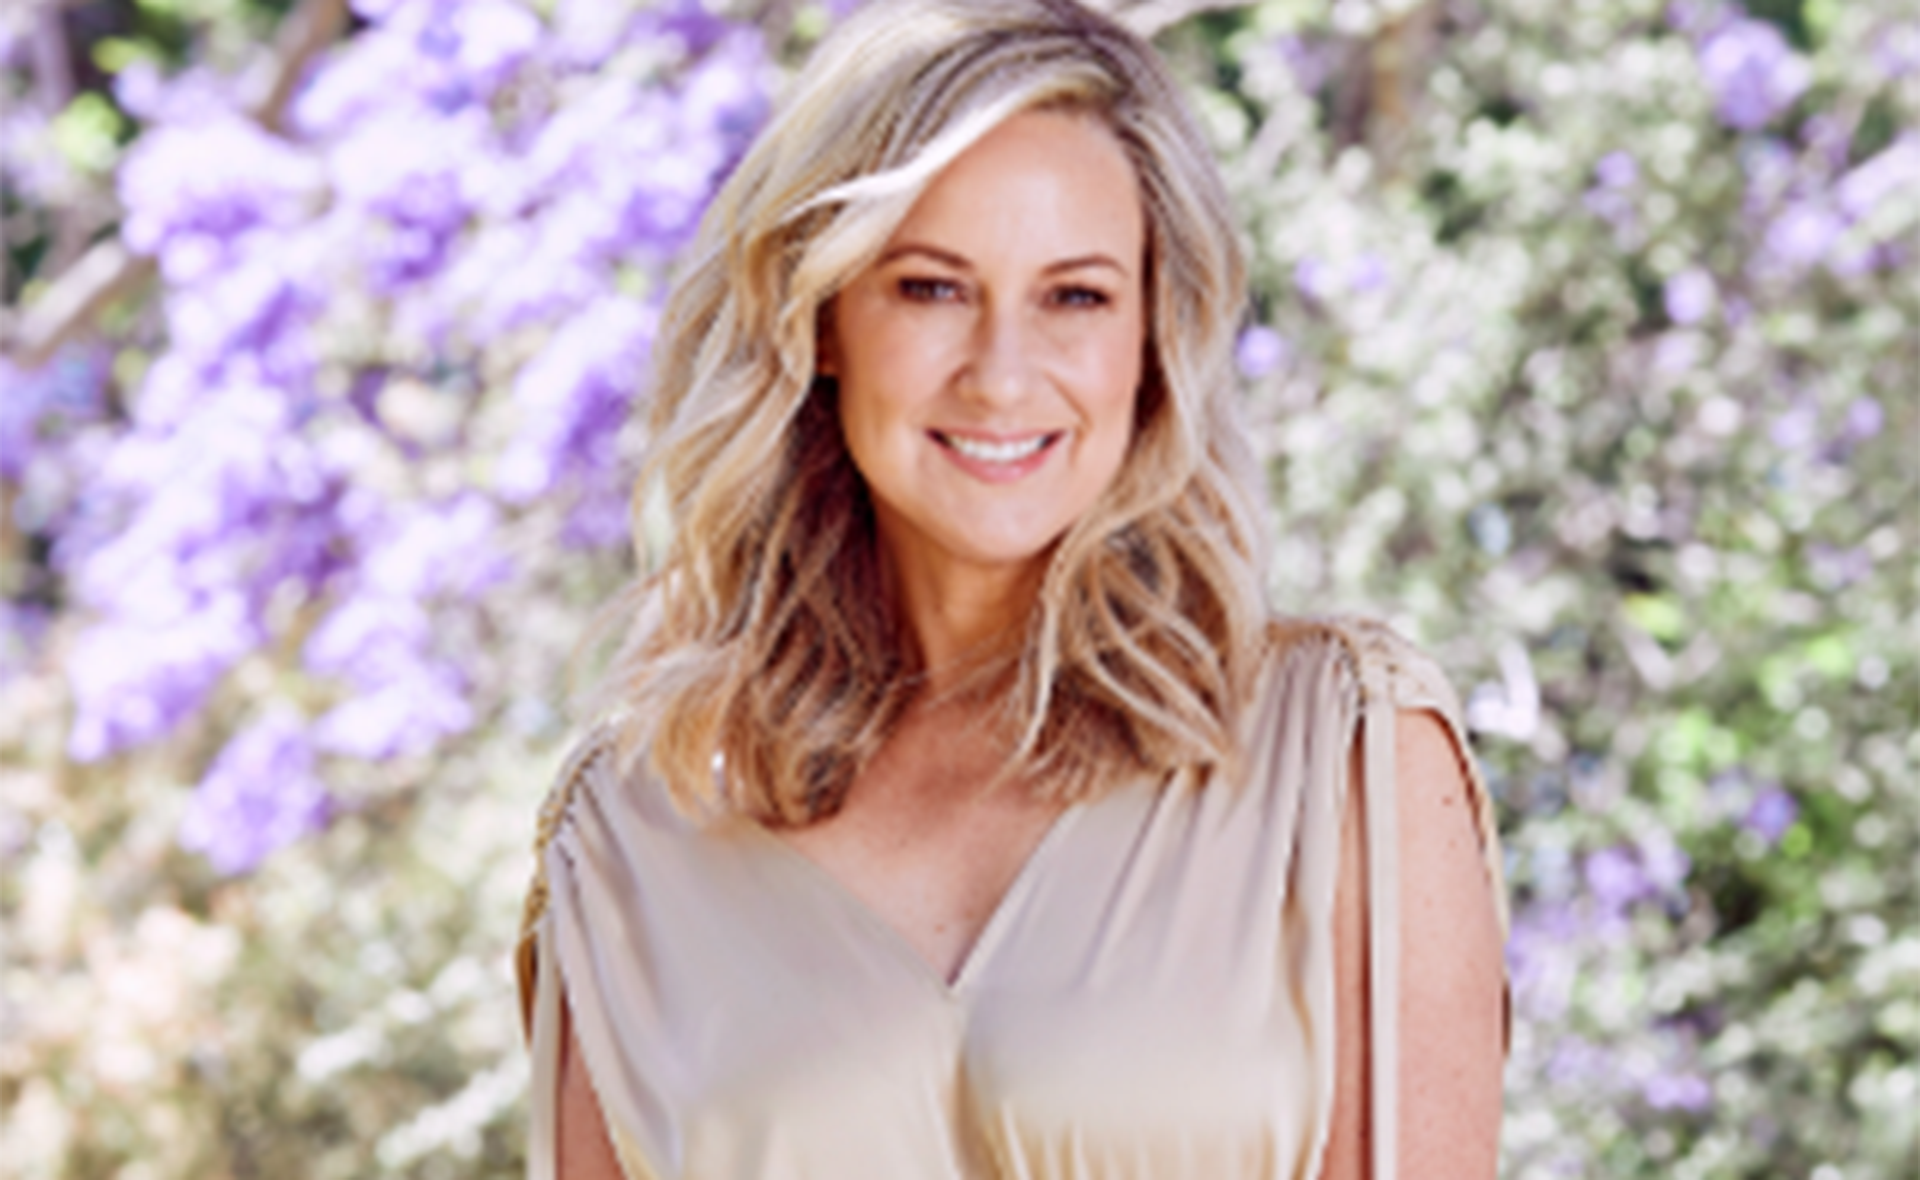 EXCLUSIVE: Melissa Doyle admits she’s struggling to let go of her kids plus, why she won’t return to breakfast TV: “It was the hardest thing I’ve done”